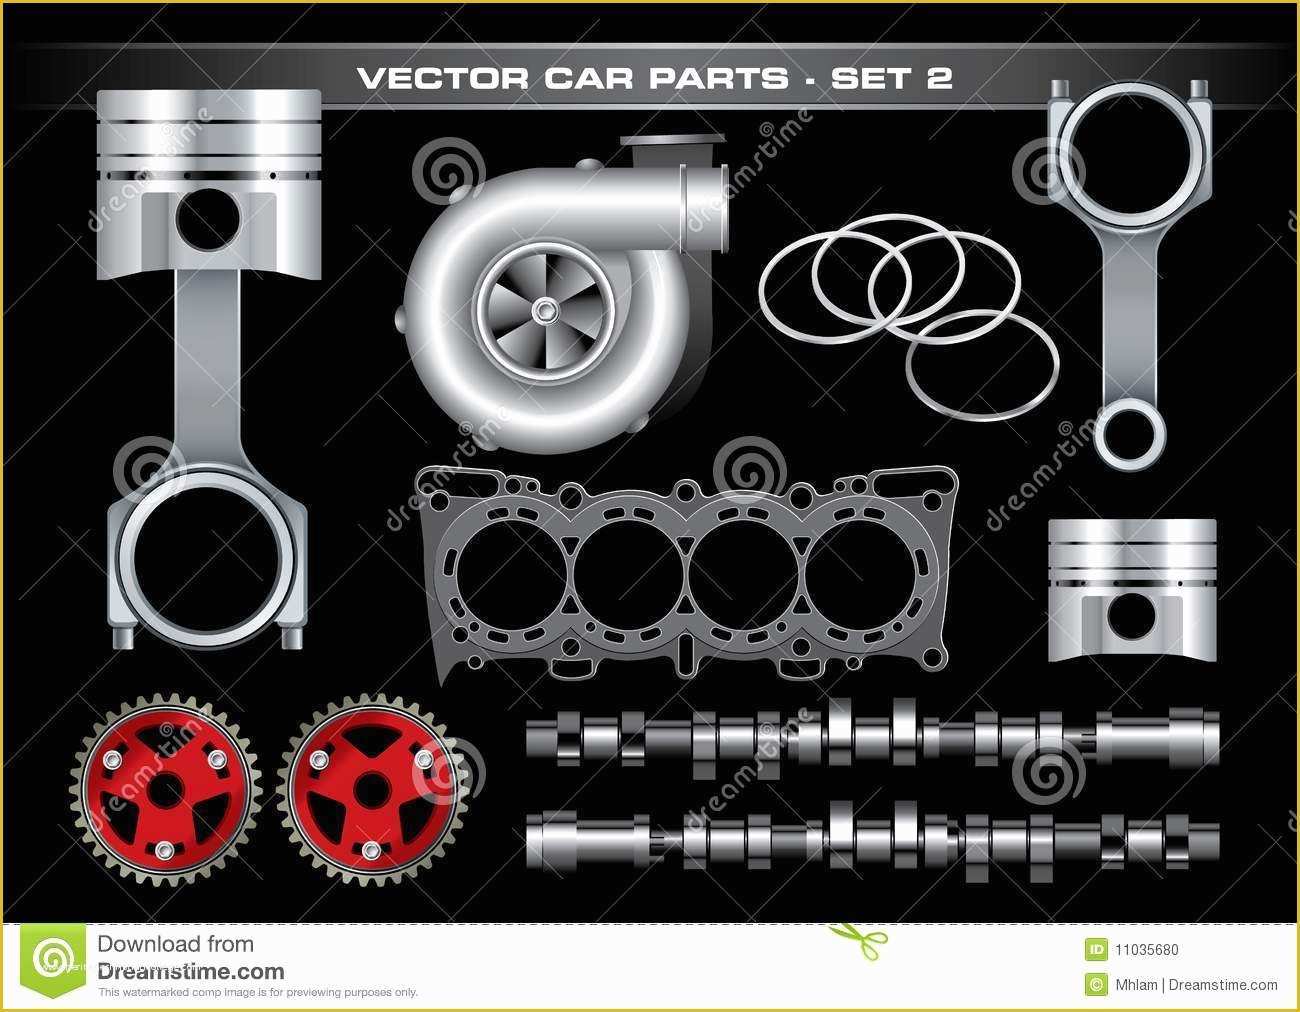 Auto Spare Parts Website Template Free Download Of Vector Car Parts Set 2 Stock Image